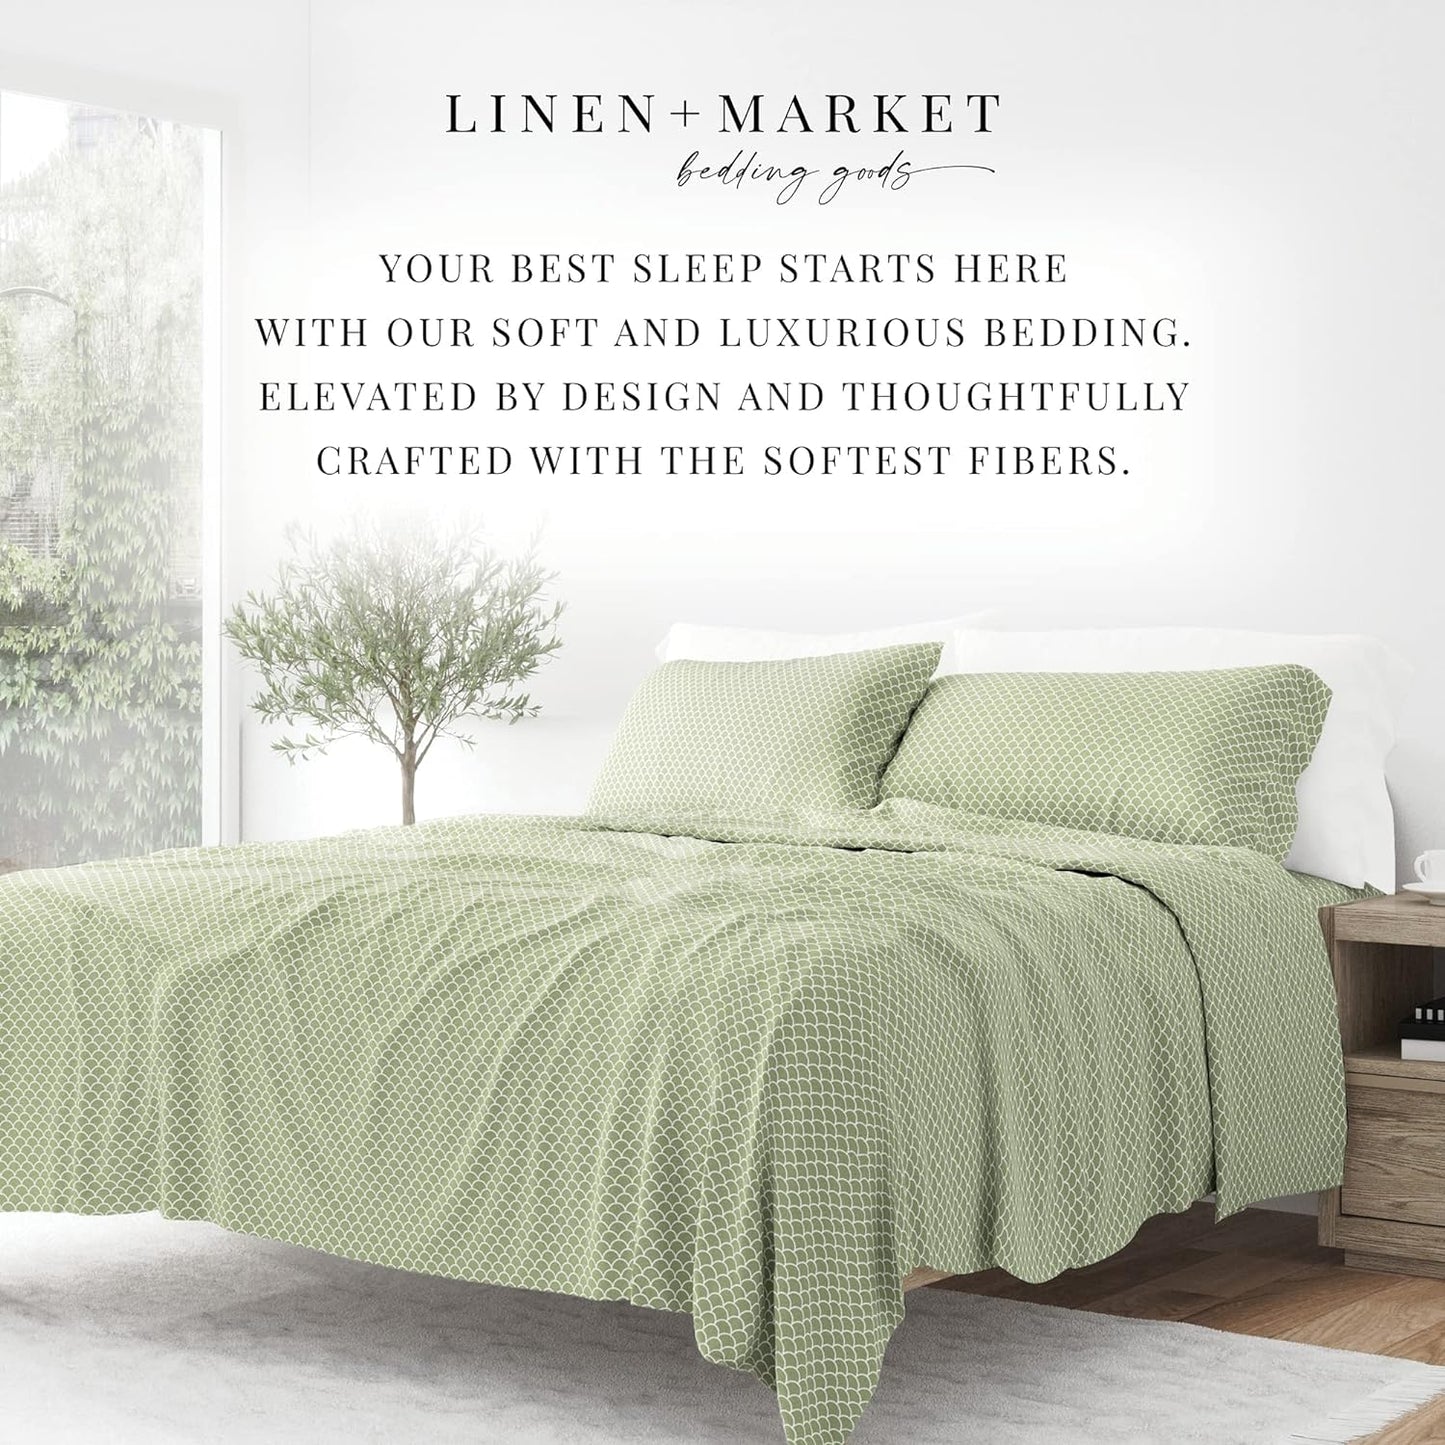 Linen Market 4 Piece Full Bedding Sheet Set (Sage Scallops) - Sleep Better Than Ever with These Ultra-Soft & Cooling Bed Sheets for Your Full Size Bed - Deep Pocket Fits 16" Mattress